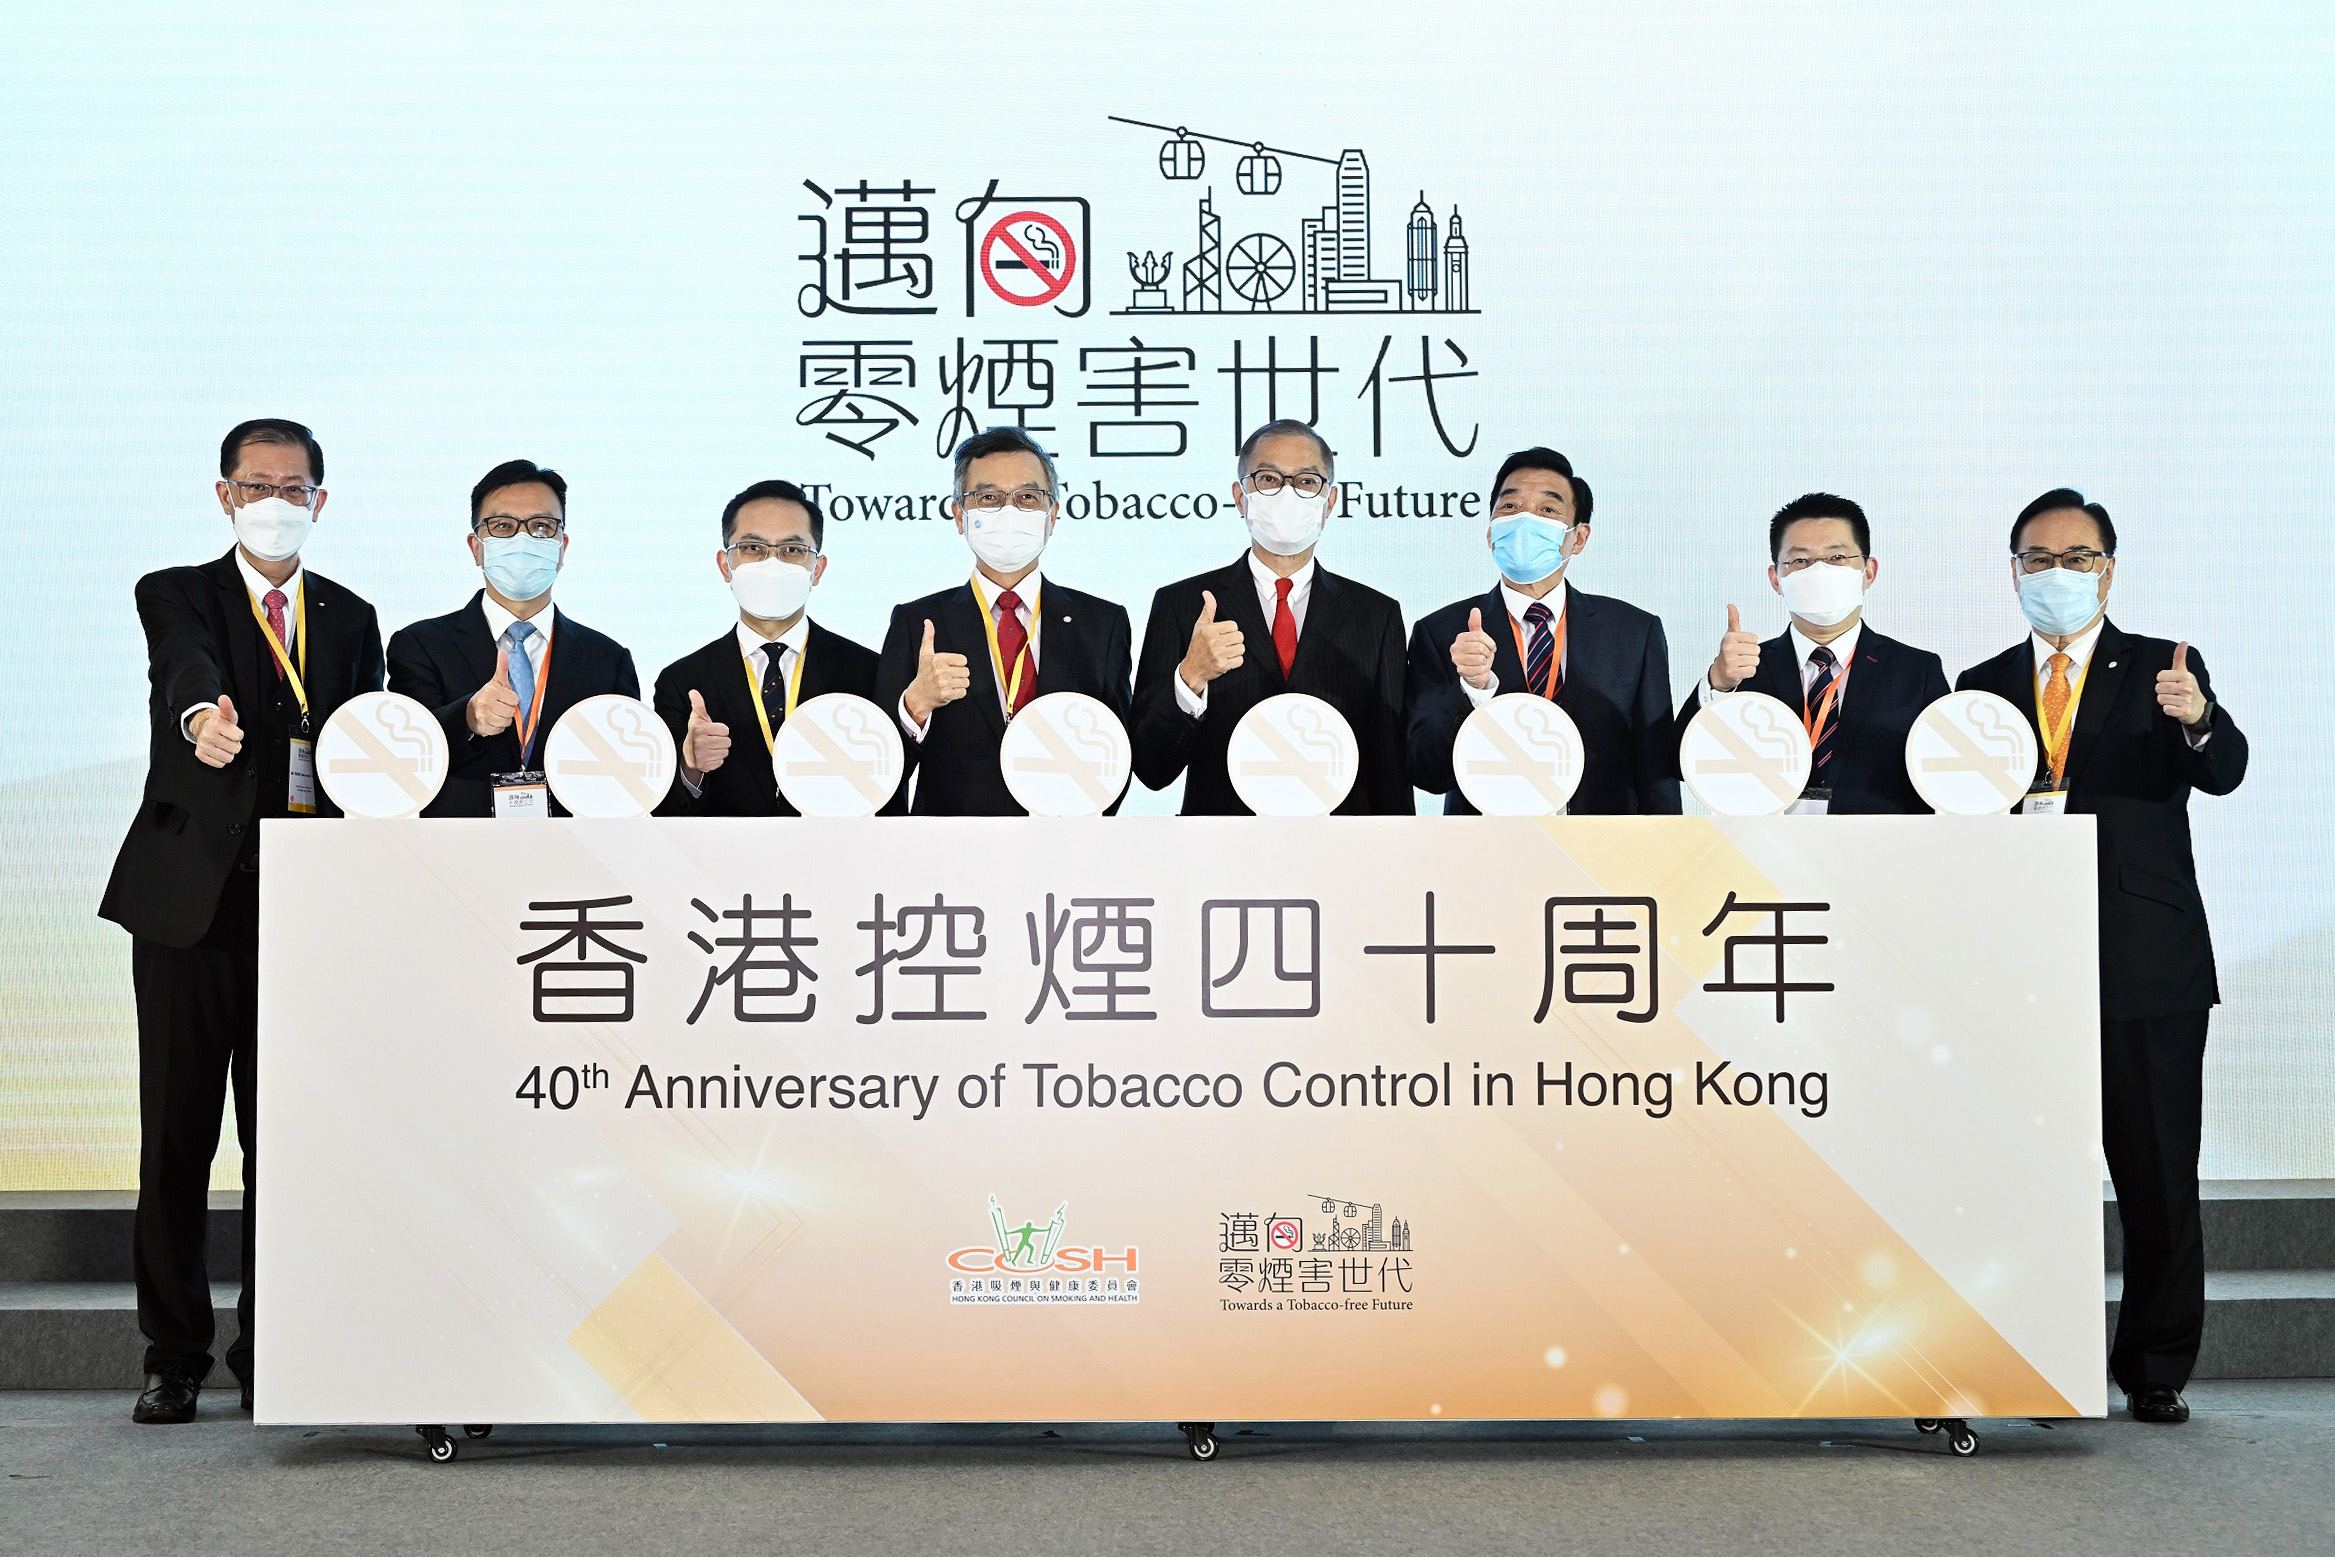 Reception for the 40th Anniversary of Tobacco Control in Hong Kong